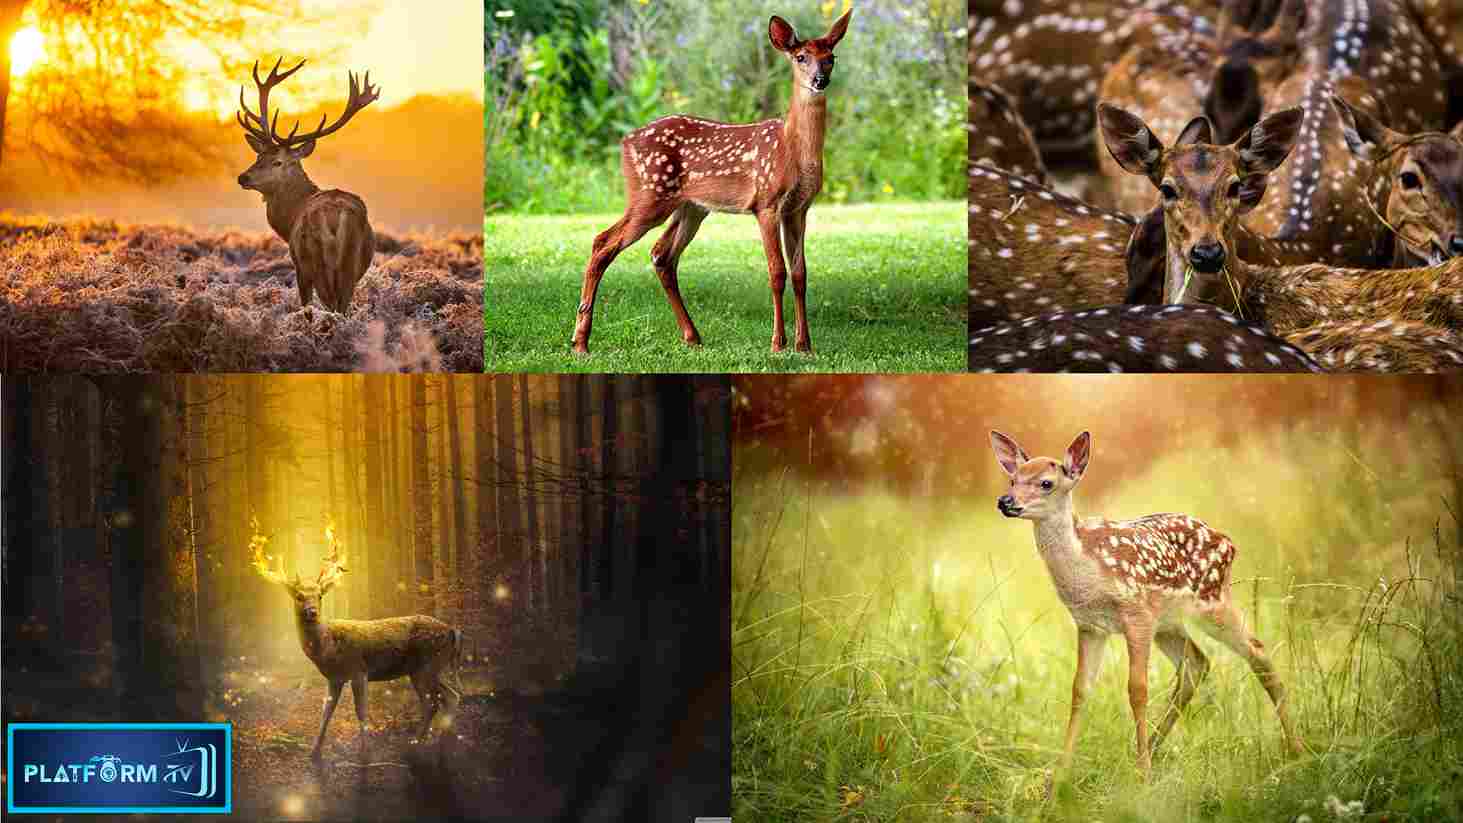 Unknown Facts About Deer - Platform Tamil